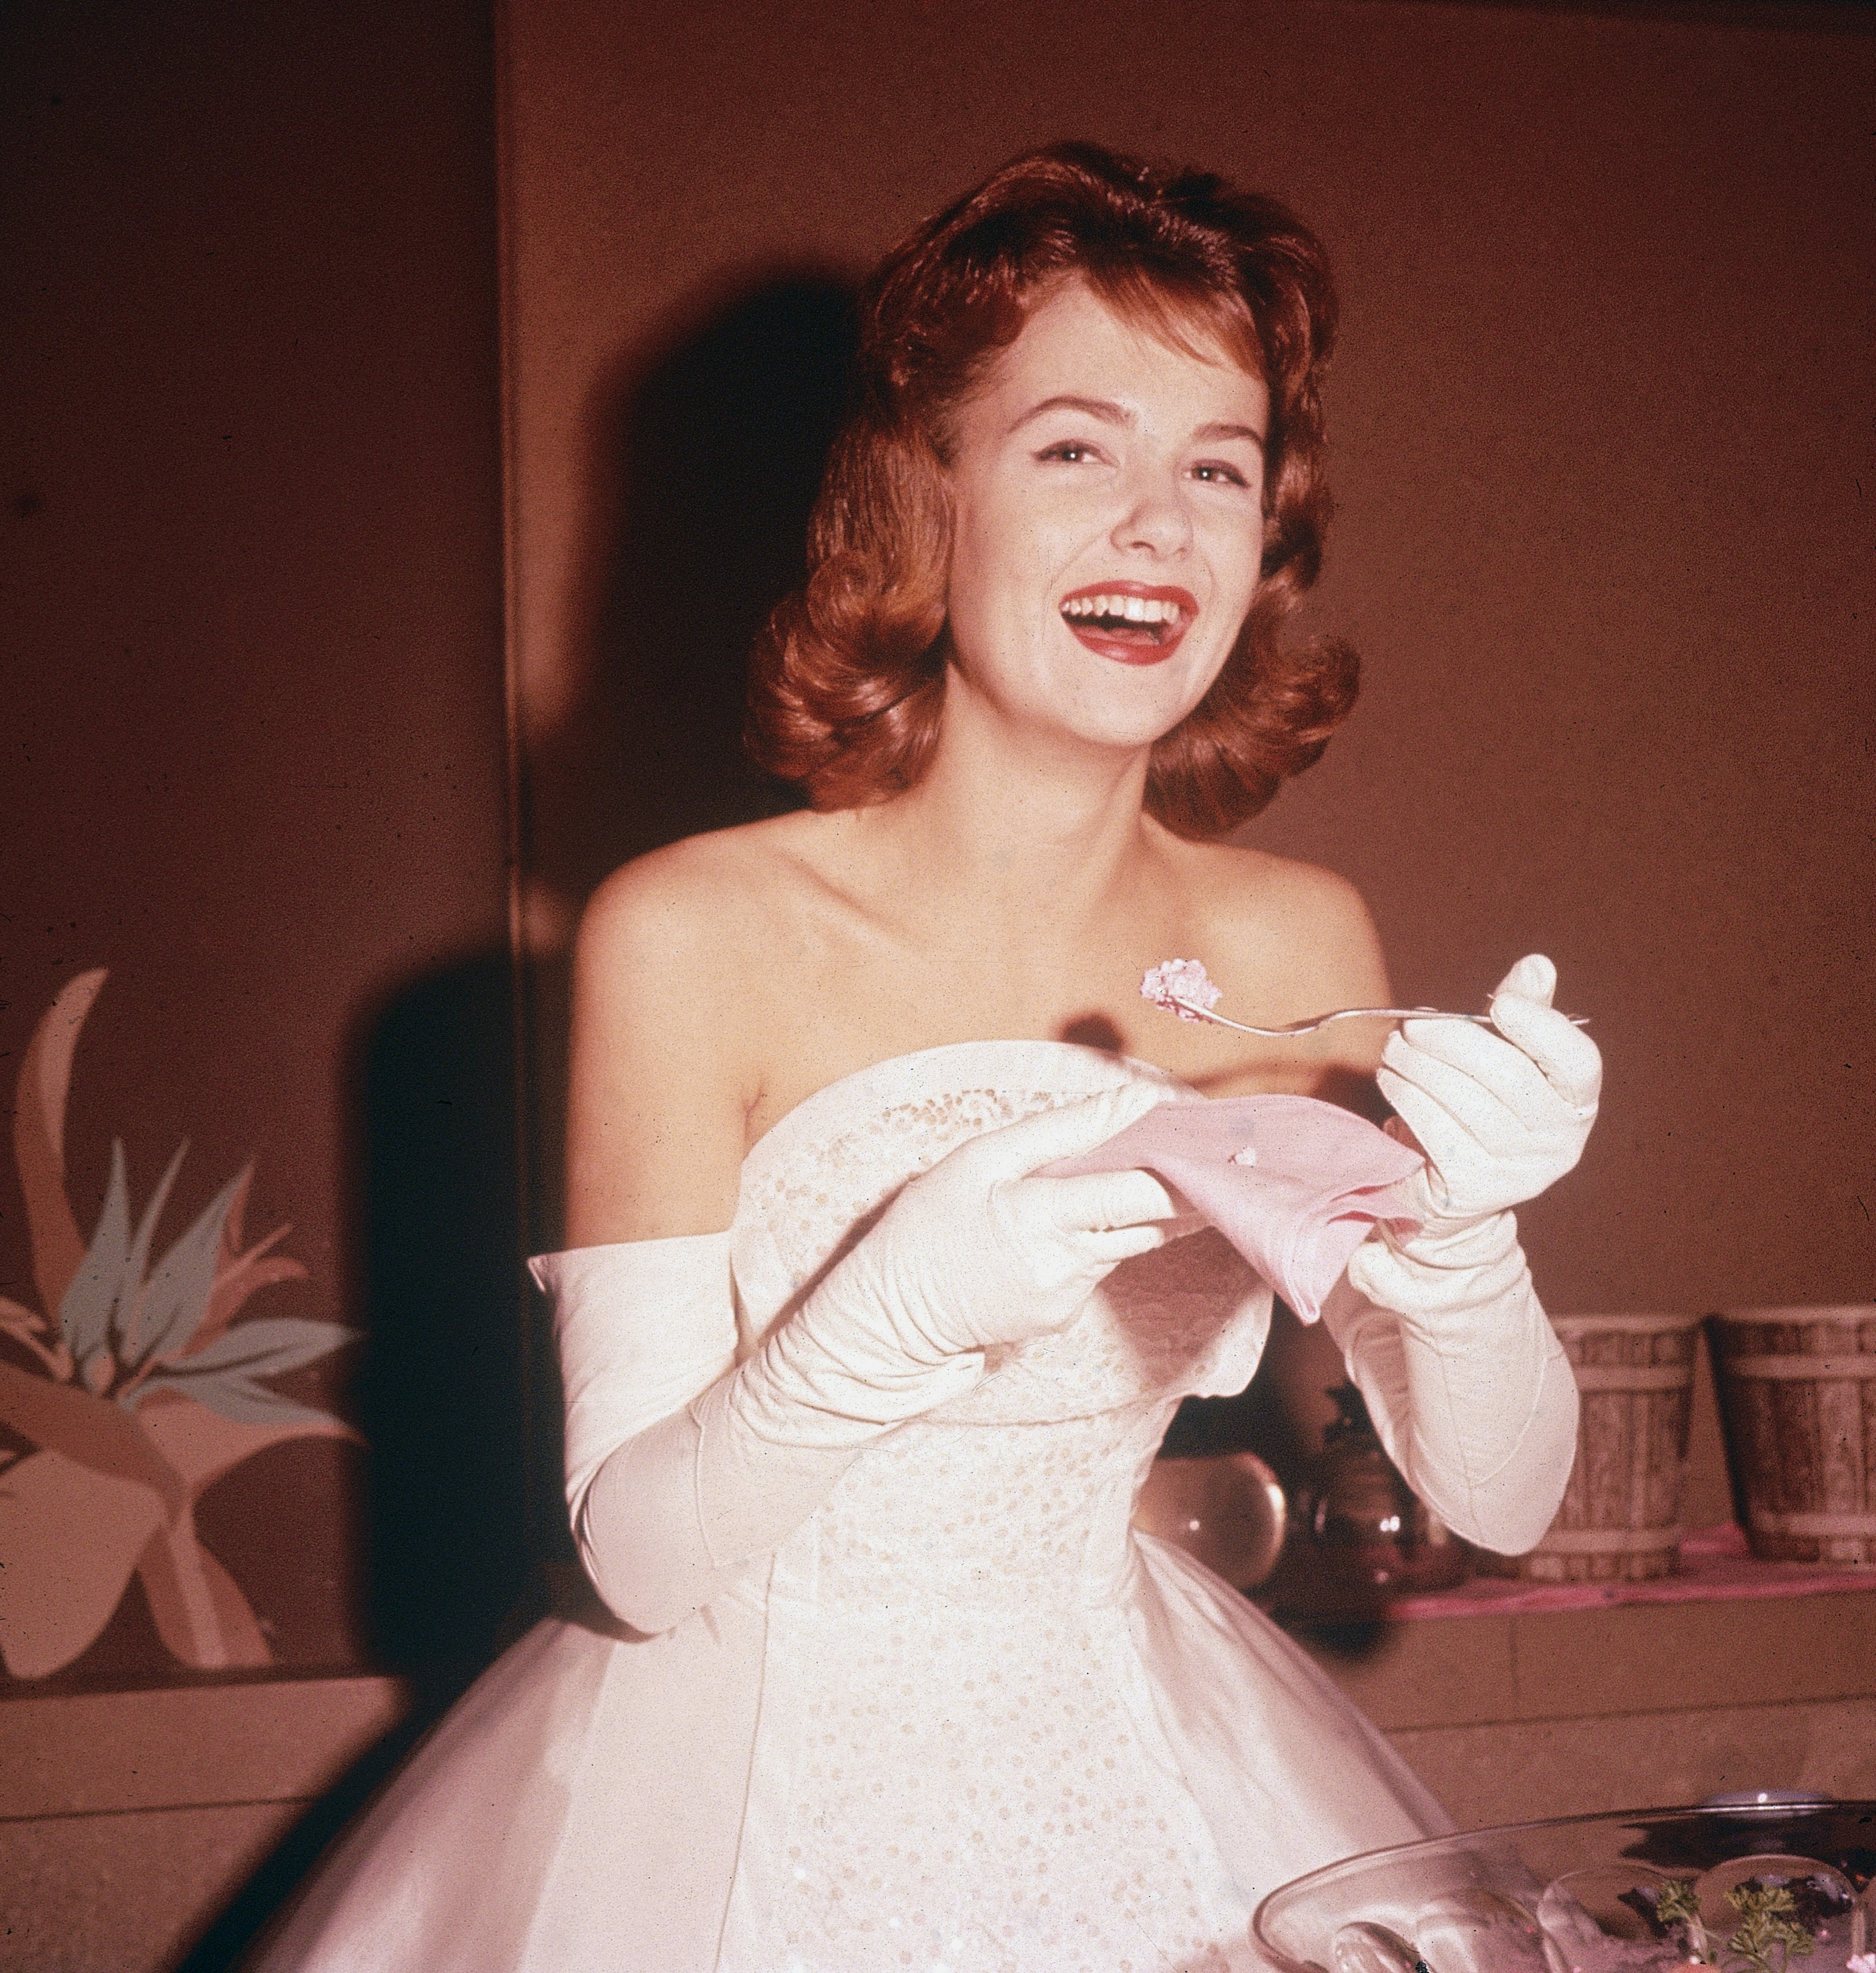 Photo of Shelley Fabares at a party circa 1963 | Source: Getty Images